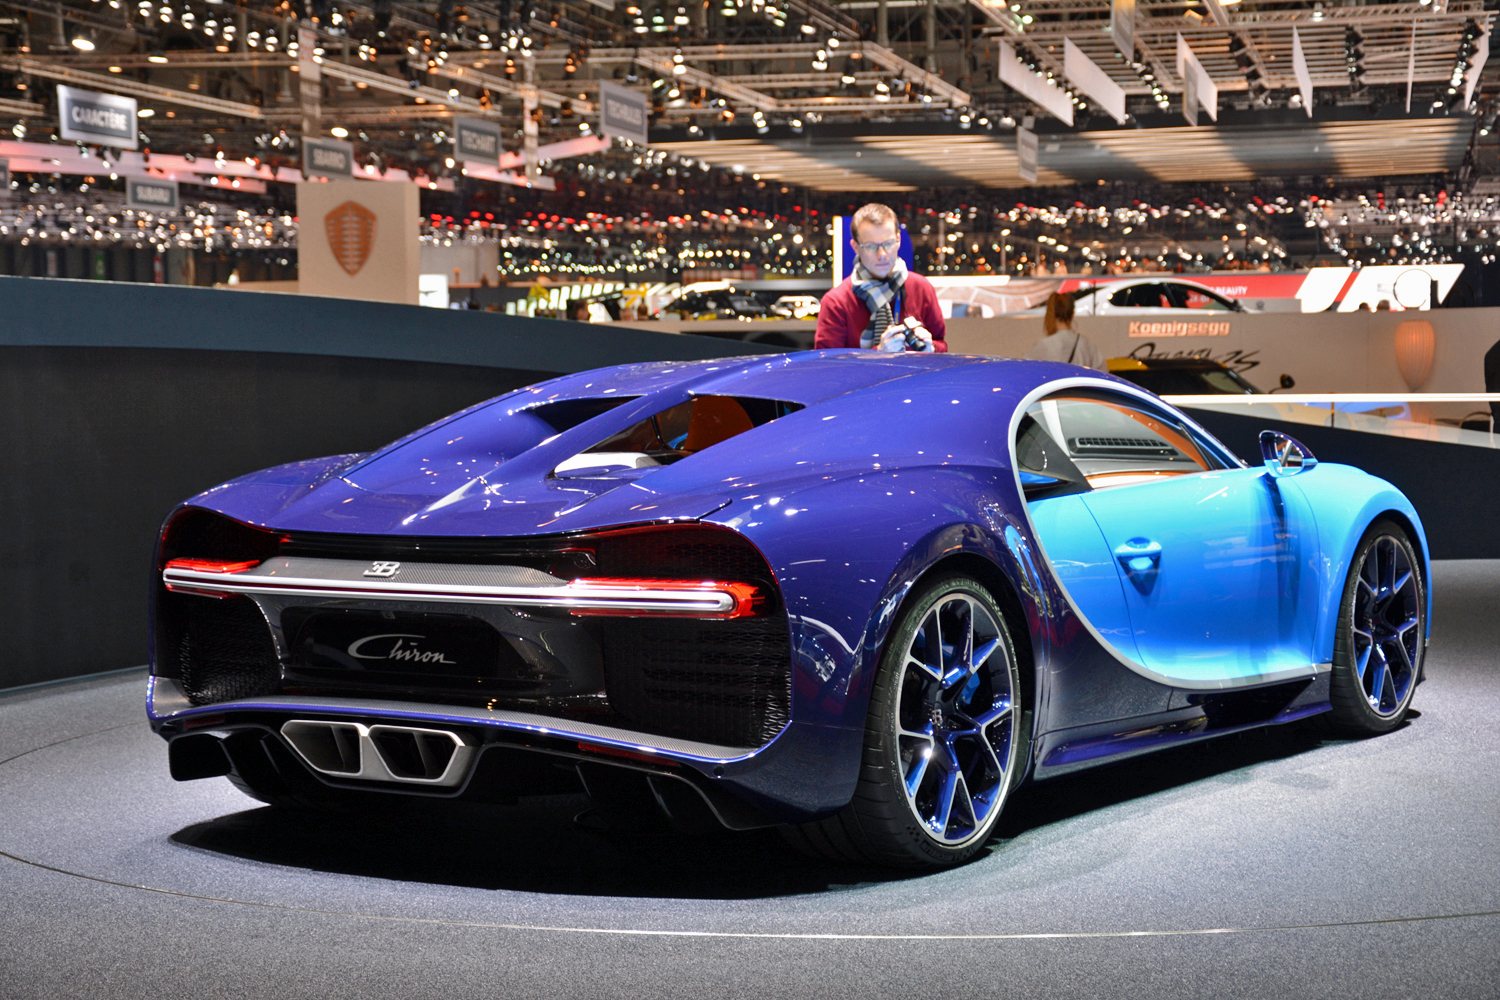 Driving the Bugatti Chiron made me wish it was electric - CNET